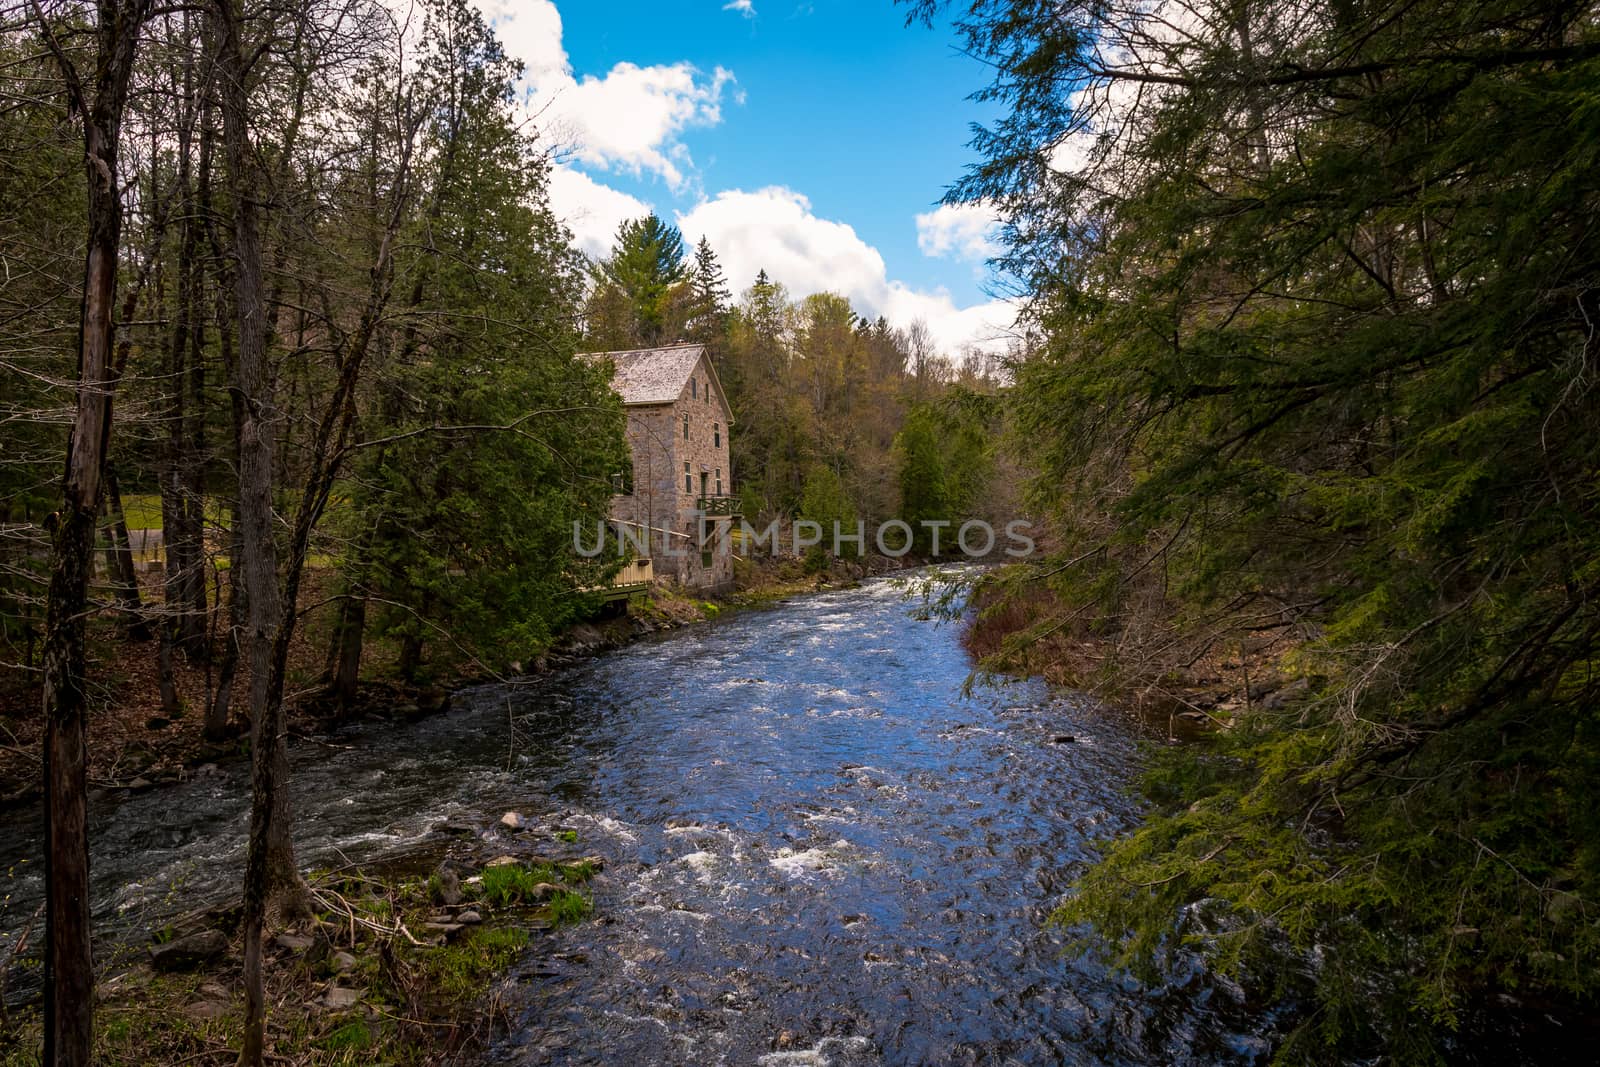 River Rapids by an Old Stone Building by colintemple